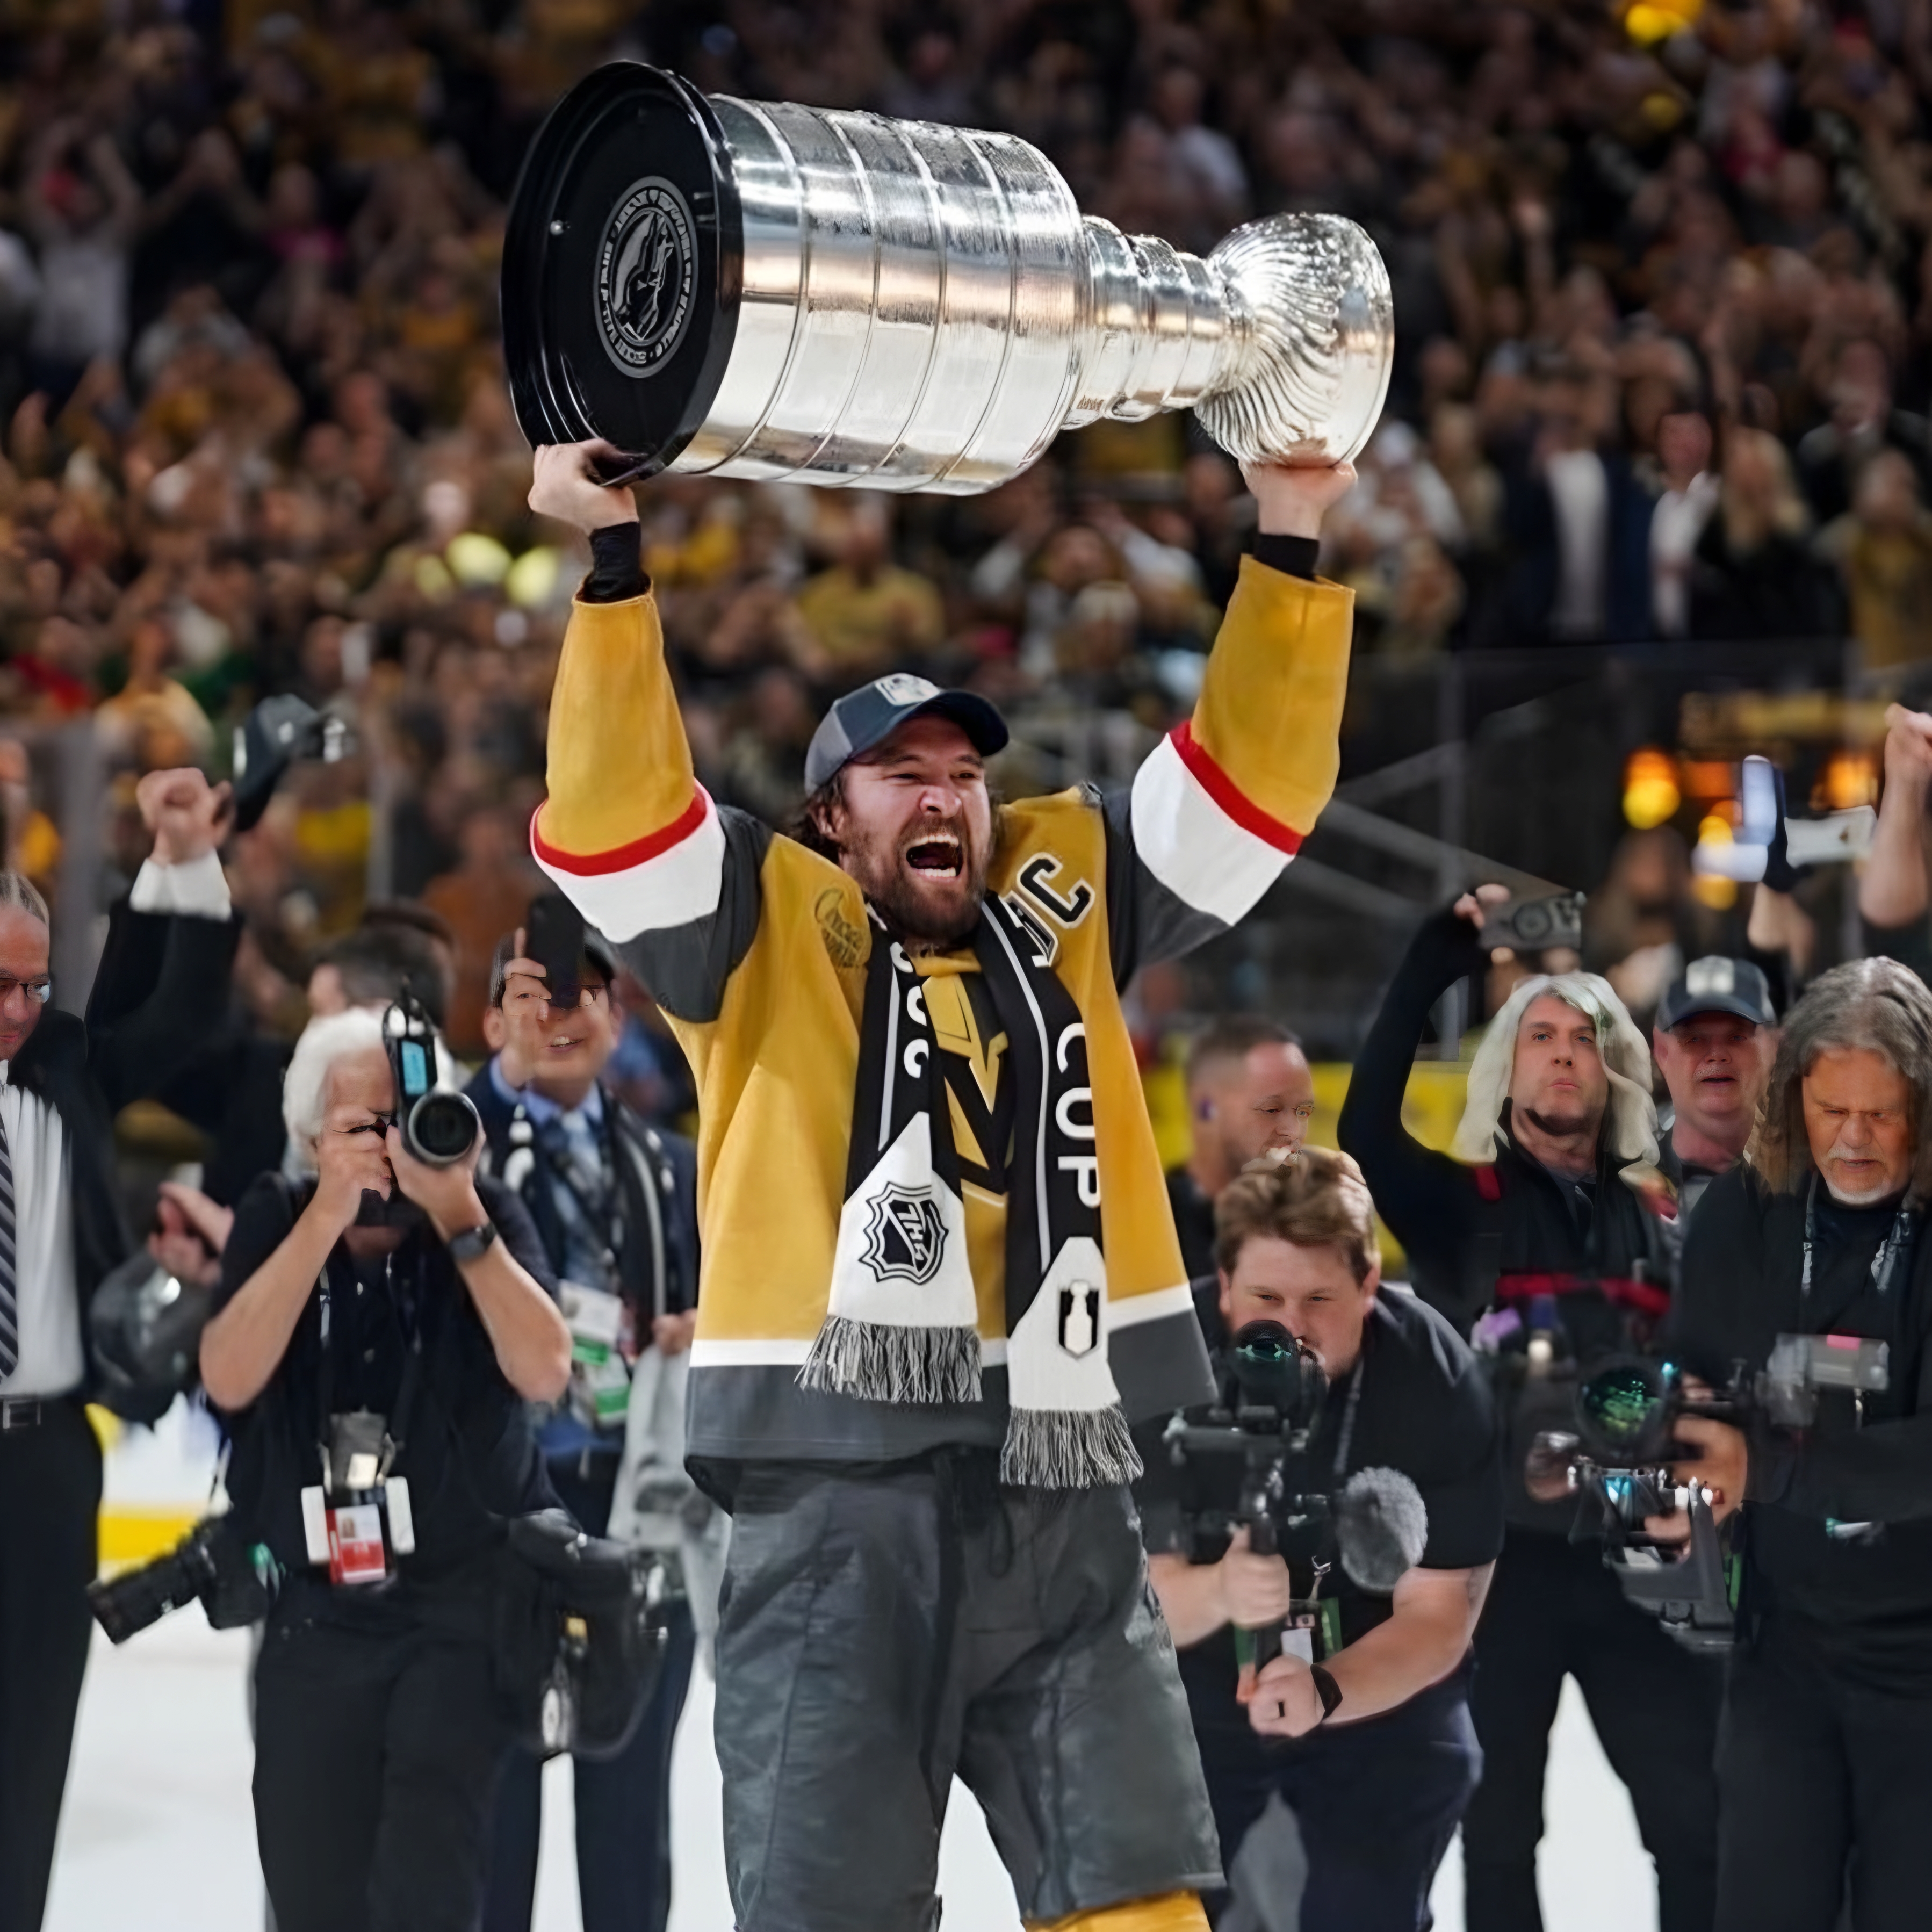 Vegas Golden Knights capture first Stanley Cup in 9-3 win over